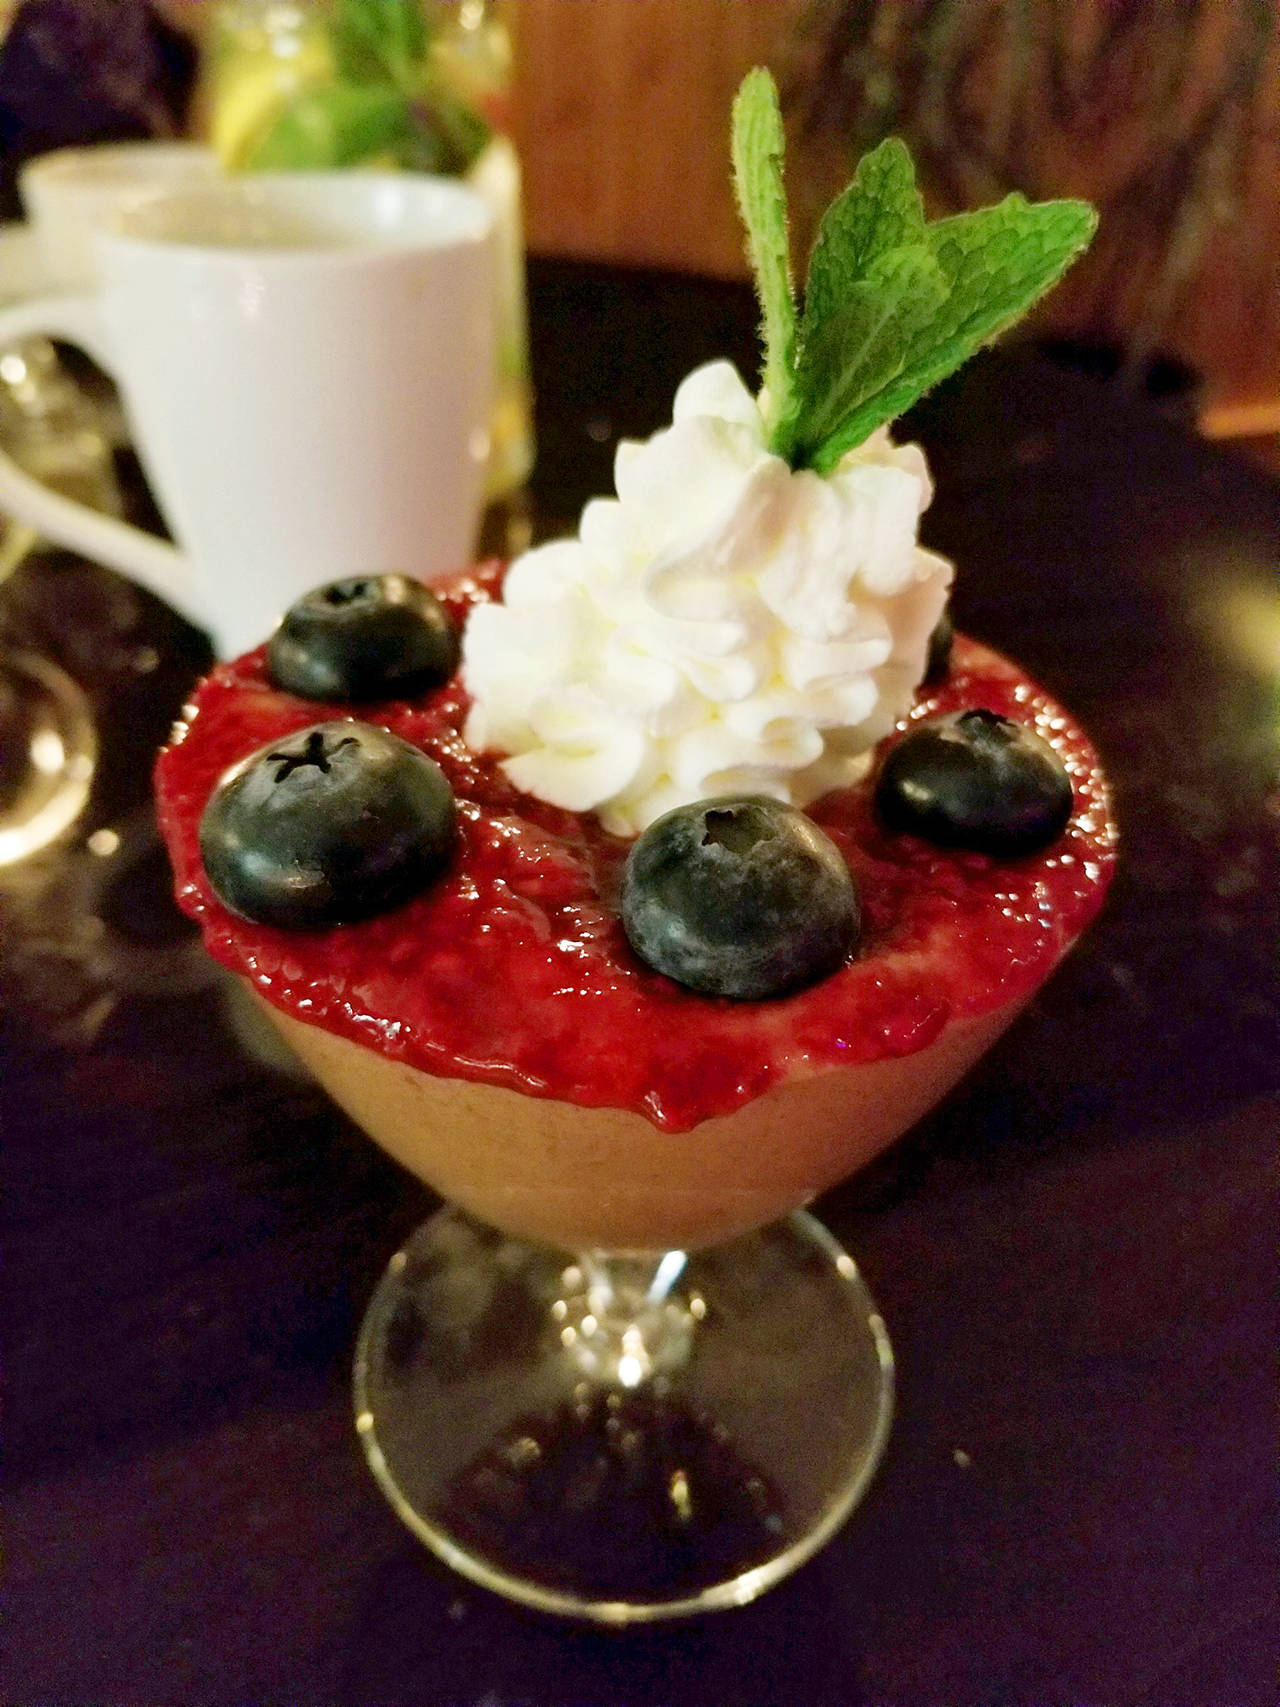 The chocolate mousse at Crow Island Farms is layered with orange whip and berry coulis, then garnished with fresh berries and mint. (Pam Bruestle)